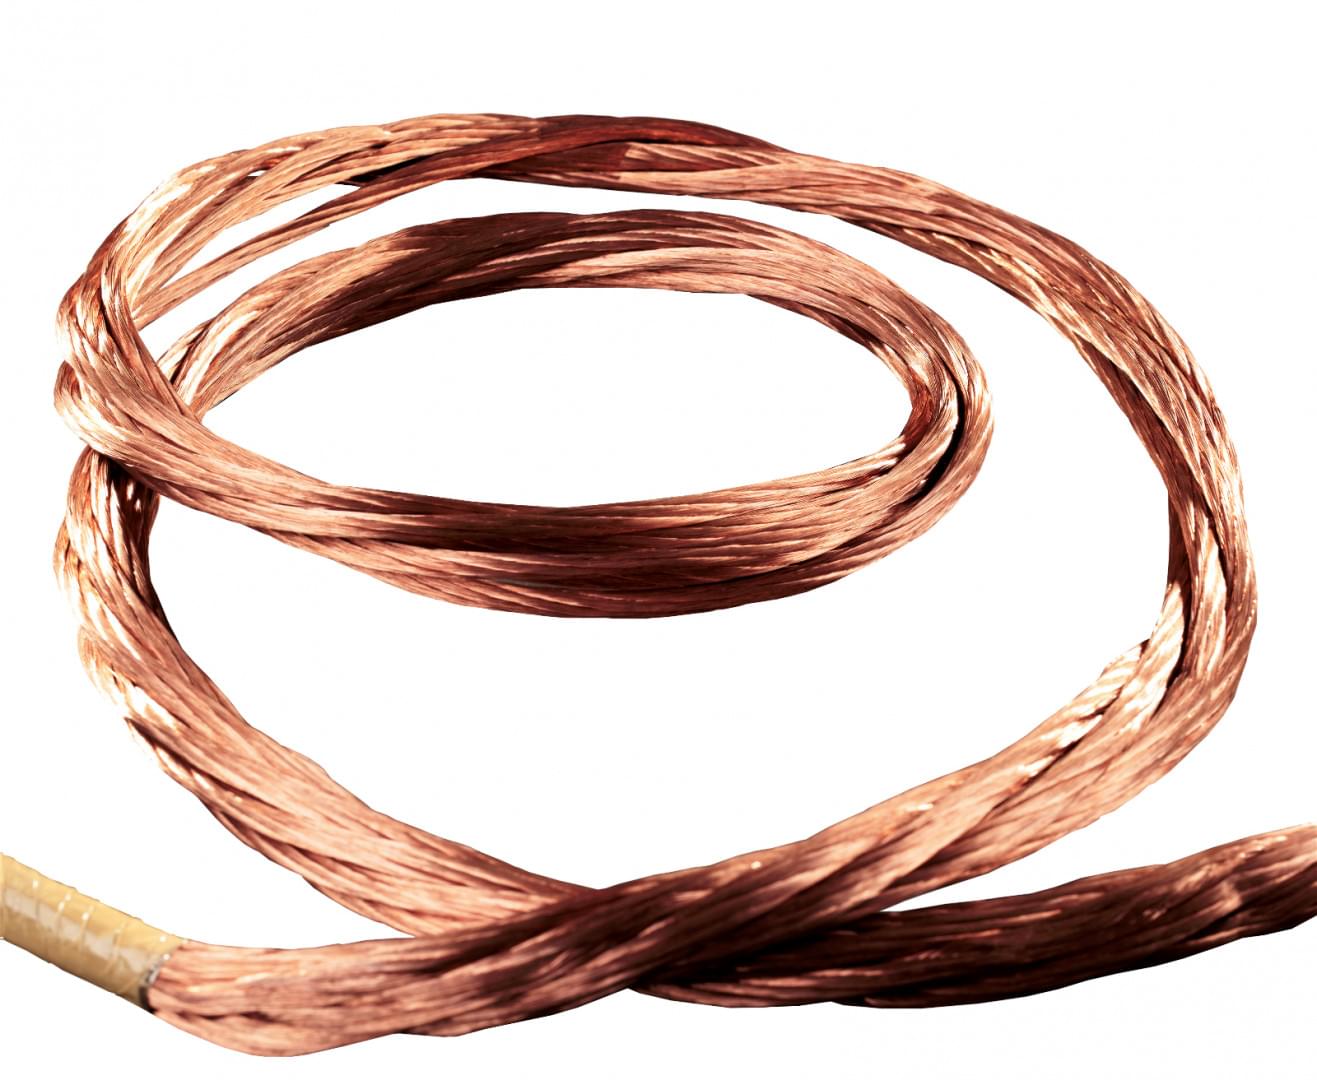 BARE STRANDED COPPER CONDUCTORS from Phelps Dodge Philippines